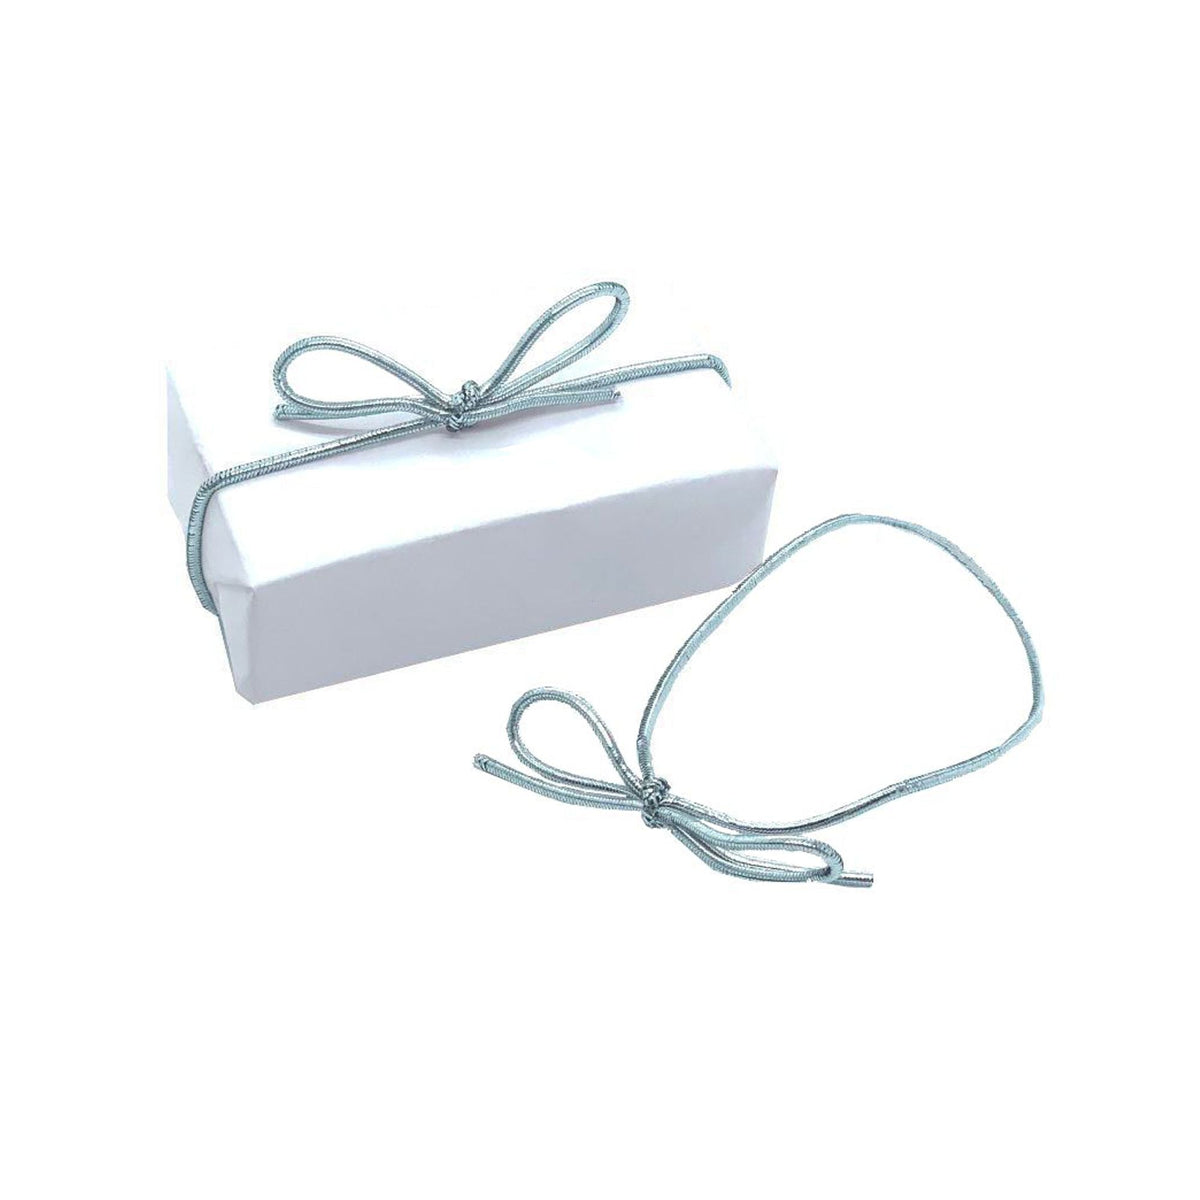 12 inch White Satin Stretch Wide Loops with Pre-Tied Bows, 50 Pack